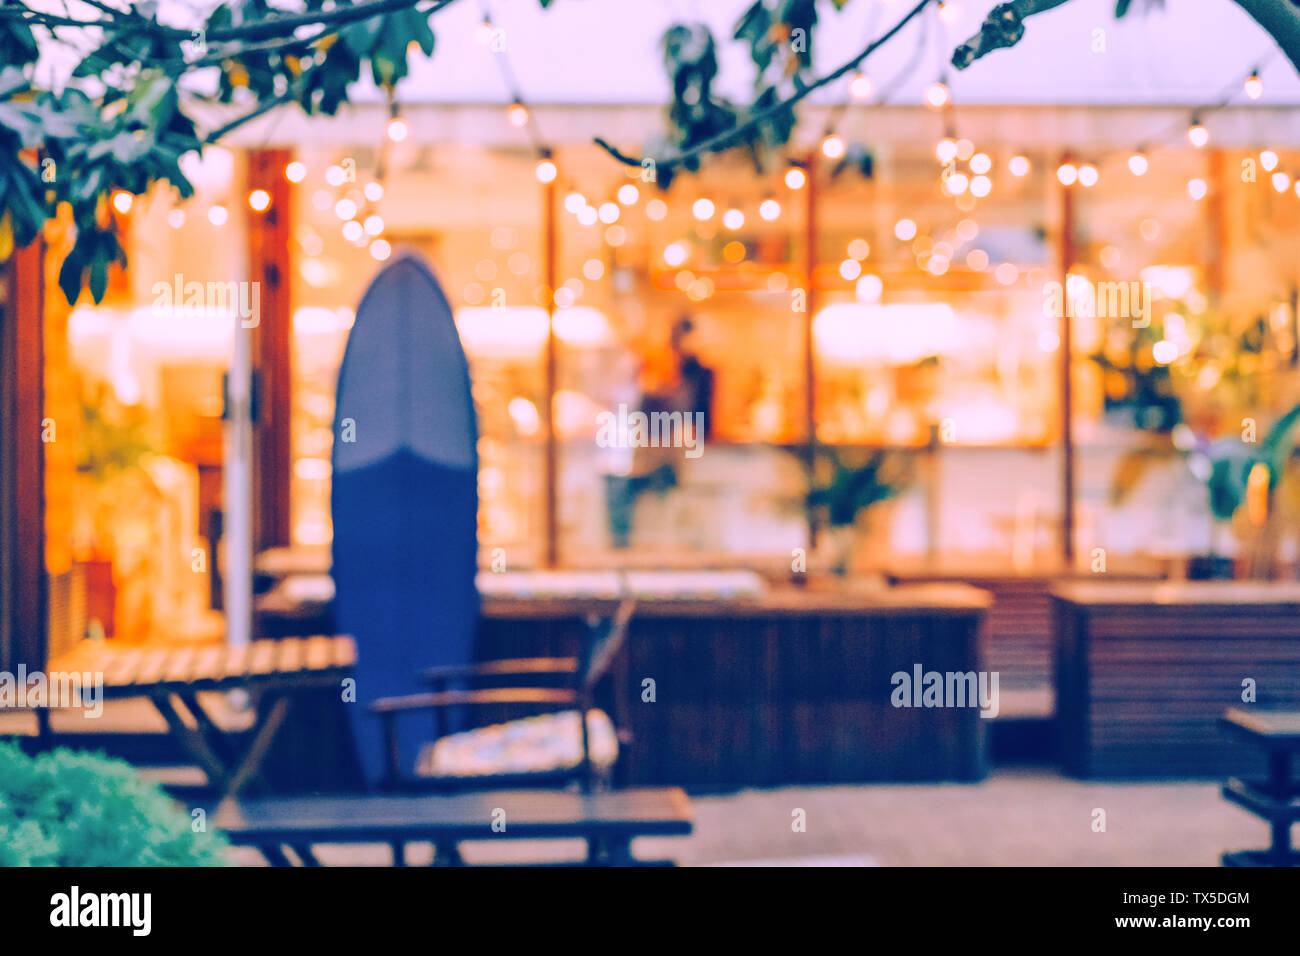 The defocused background of the summer coffee house, in the foreground a surfboard, a garland with light bulbs creates a cosiness in the interior, a m Stock Photo